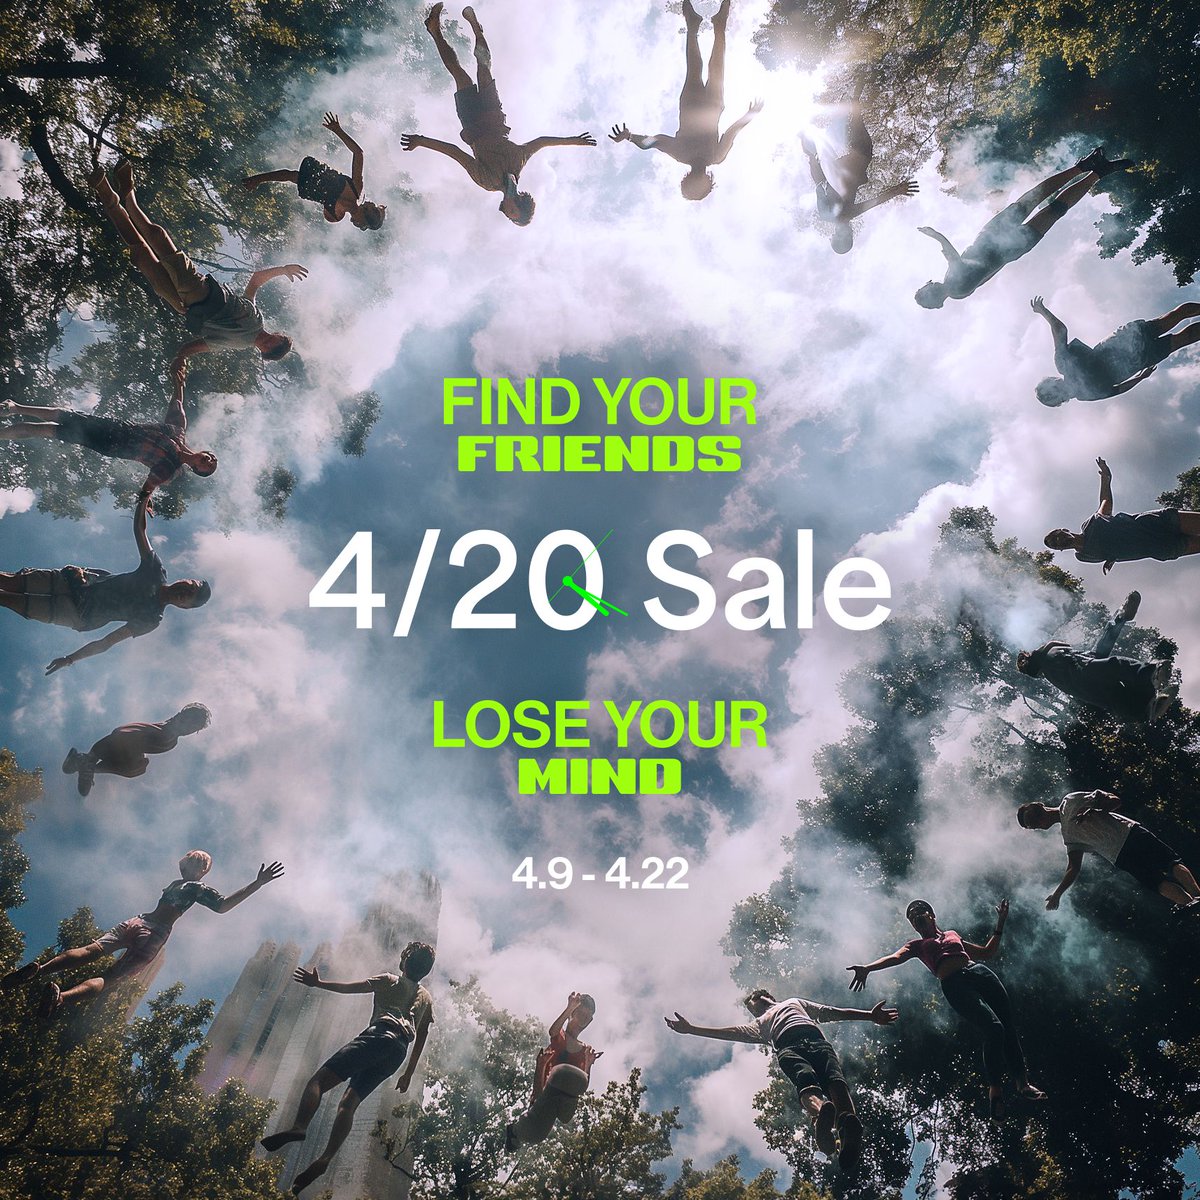 The time is now. Don't miss sales on Proxy, Peak Pro, Plus + Peak, limited edition bundles, 25-50% off accessories + merch, and free shipping over $75. Shop the 4/20 Sale: puffco.com/pages/420